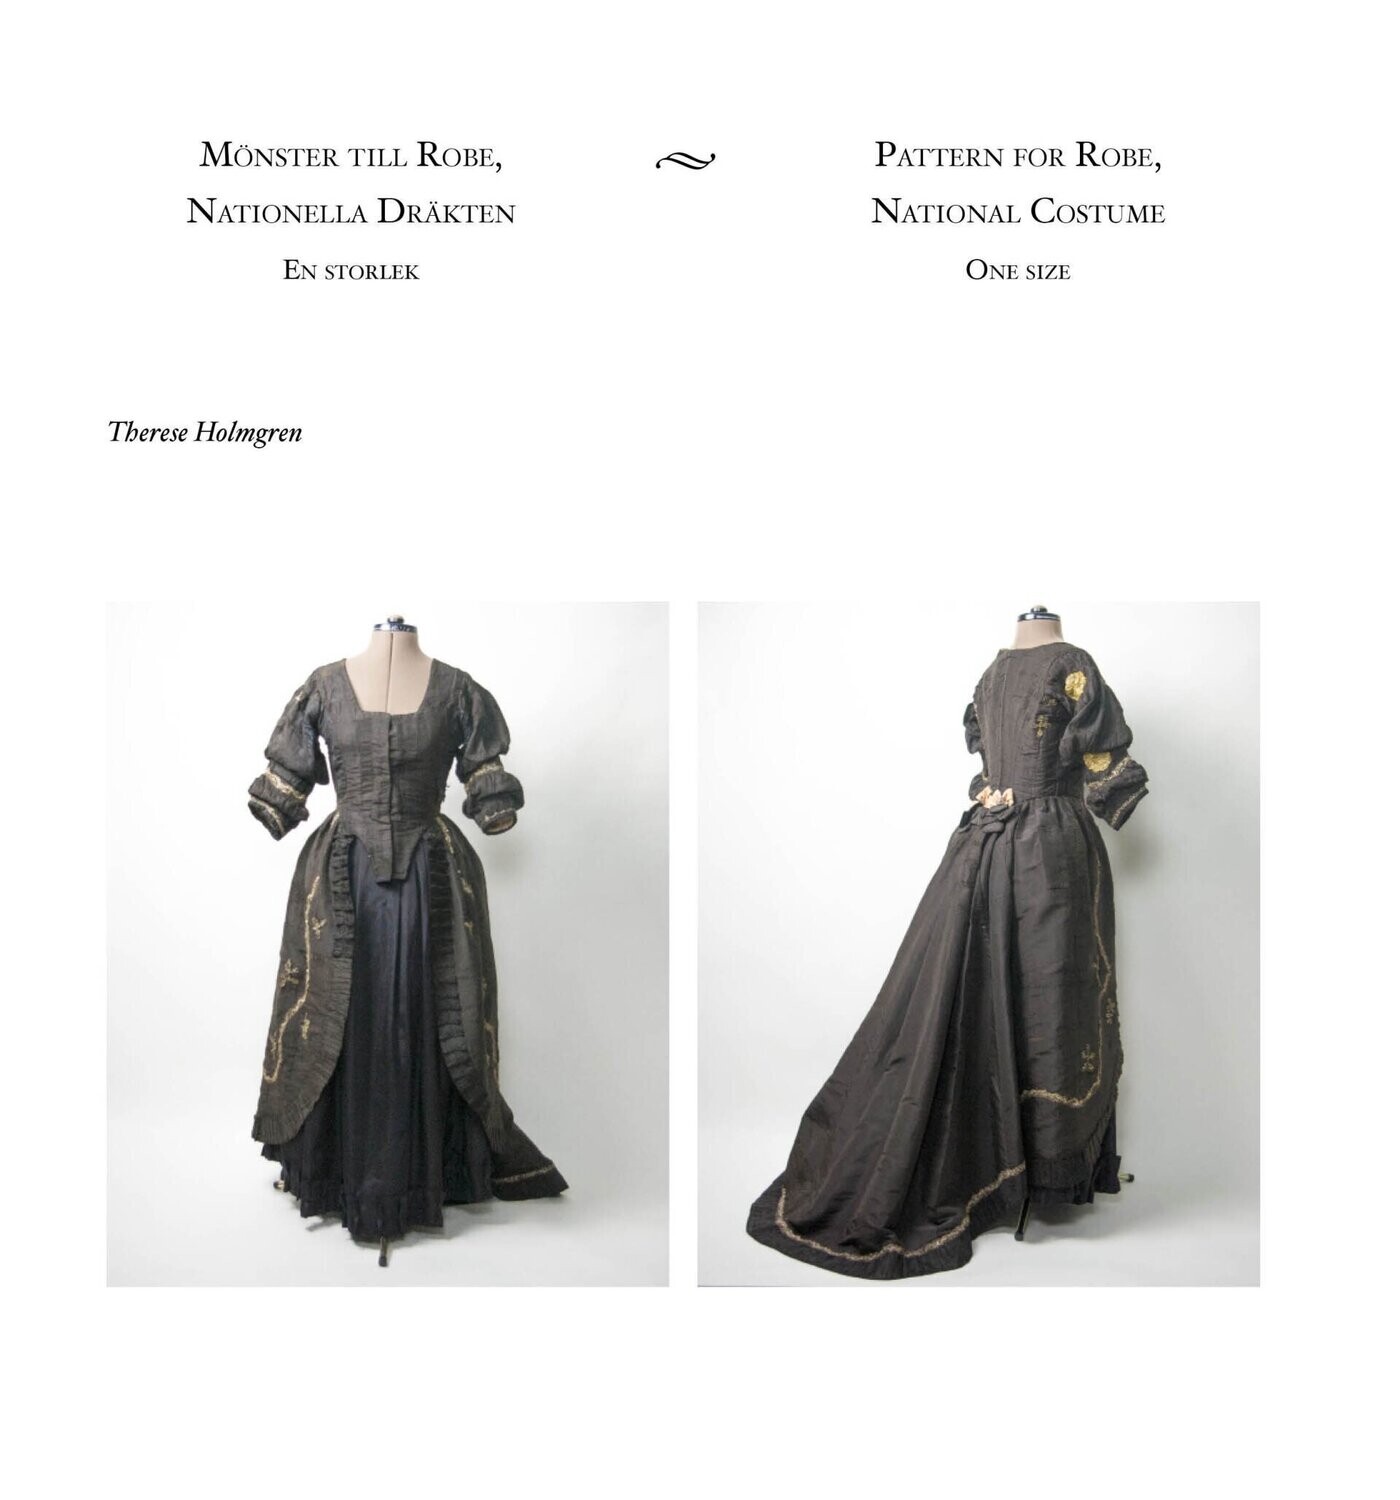 Pattern for Robe, National Costume PDF